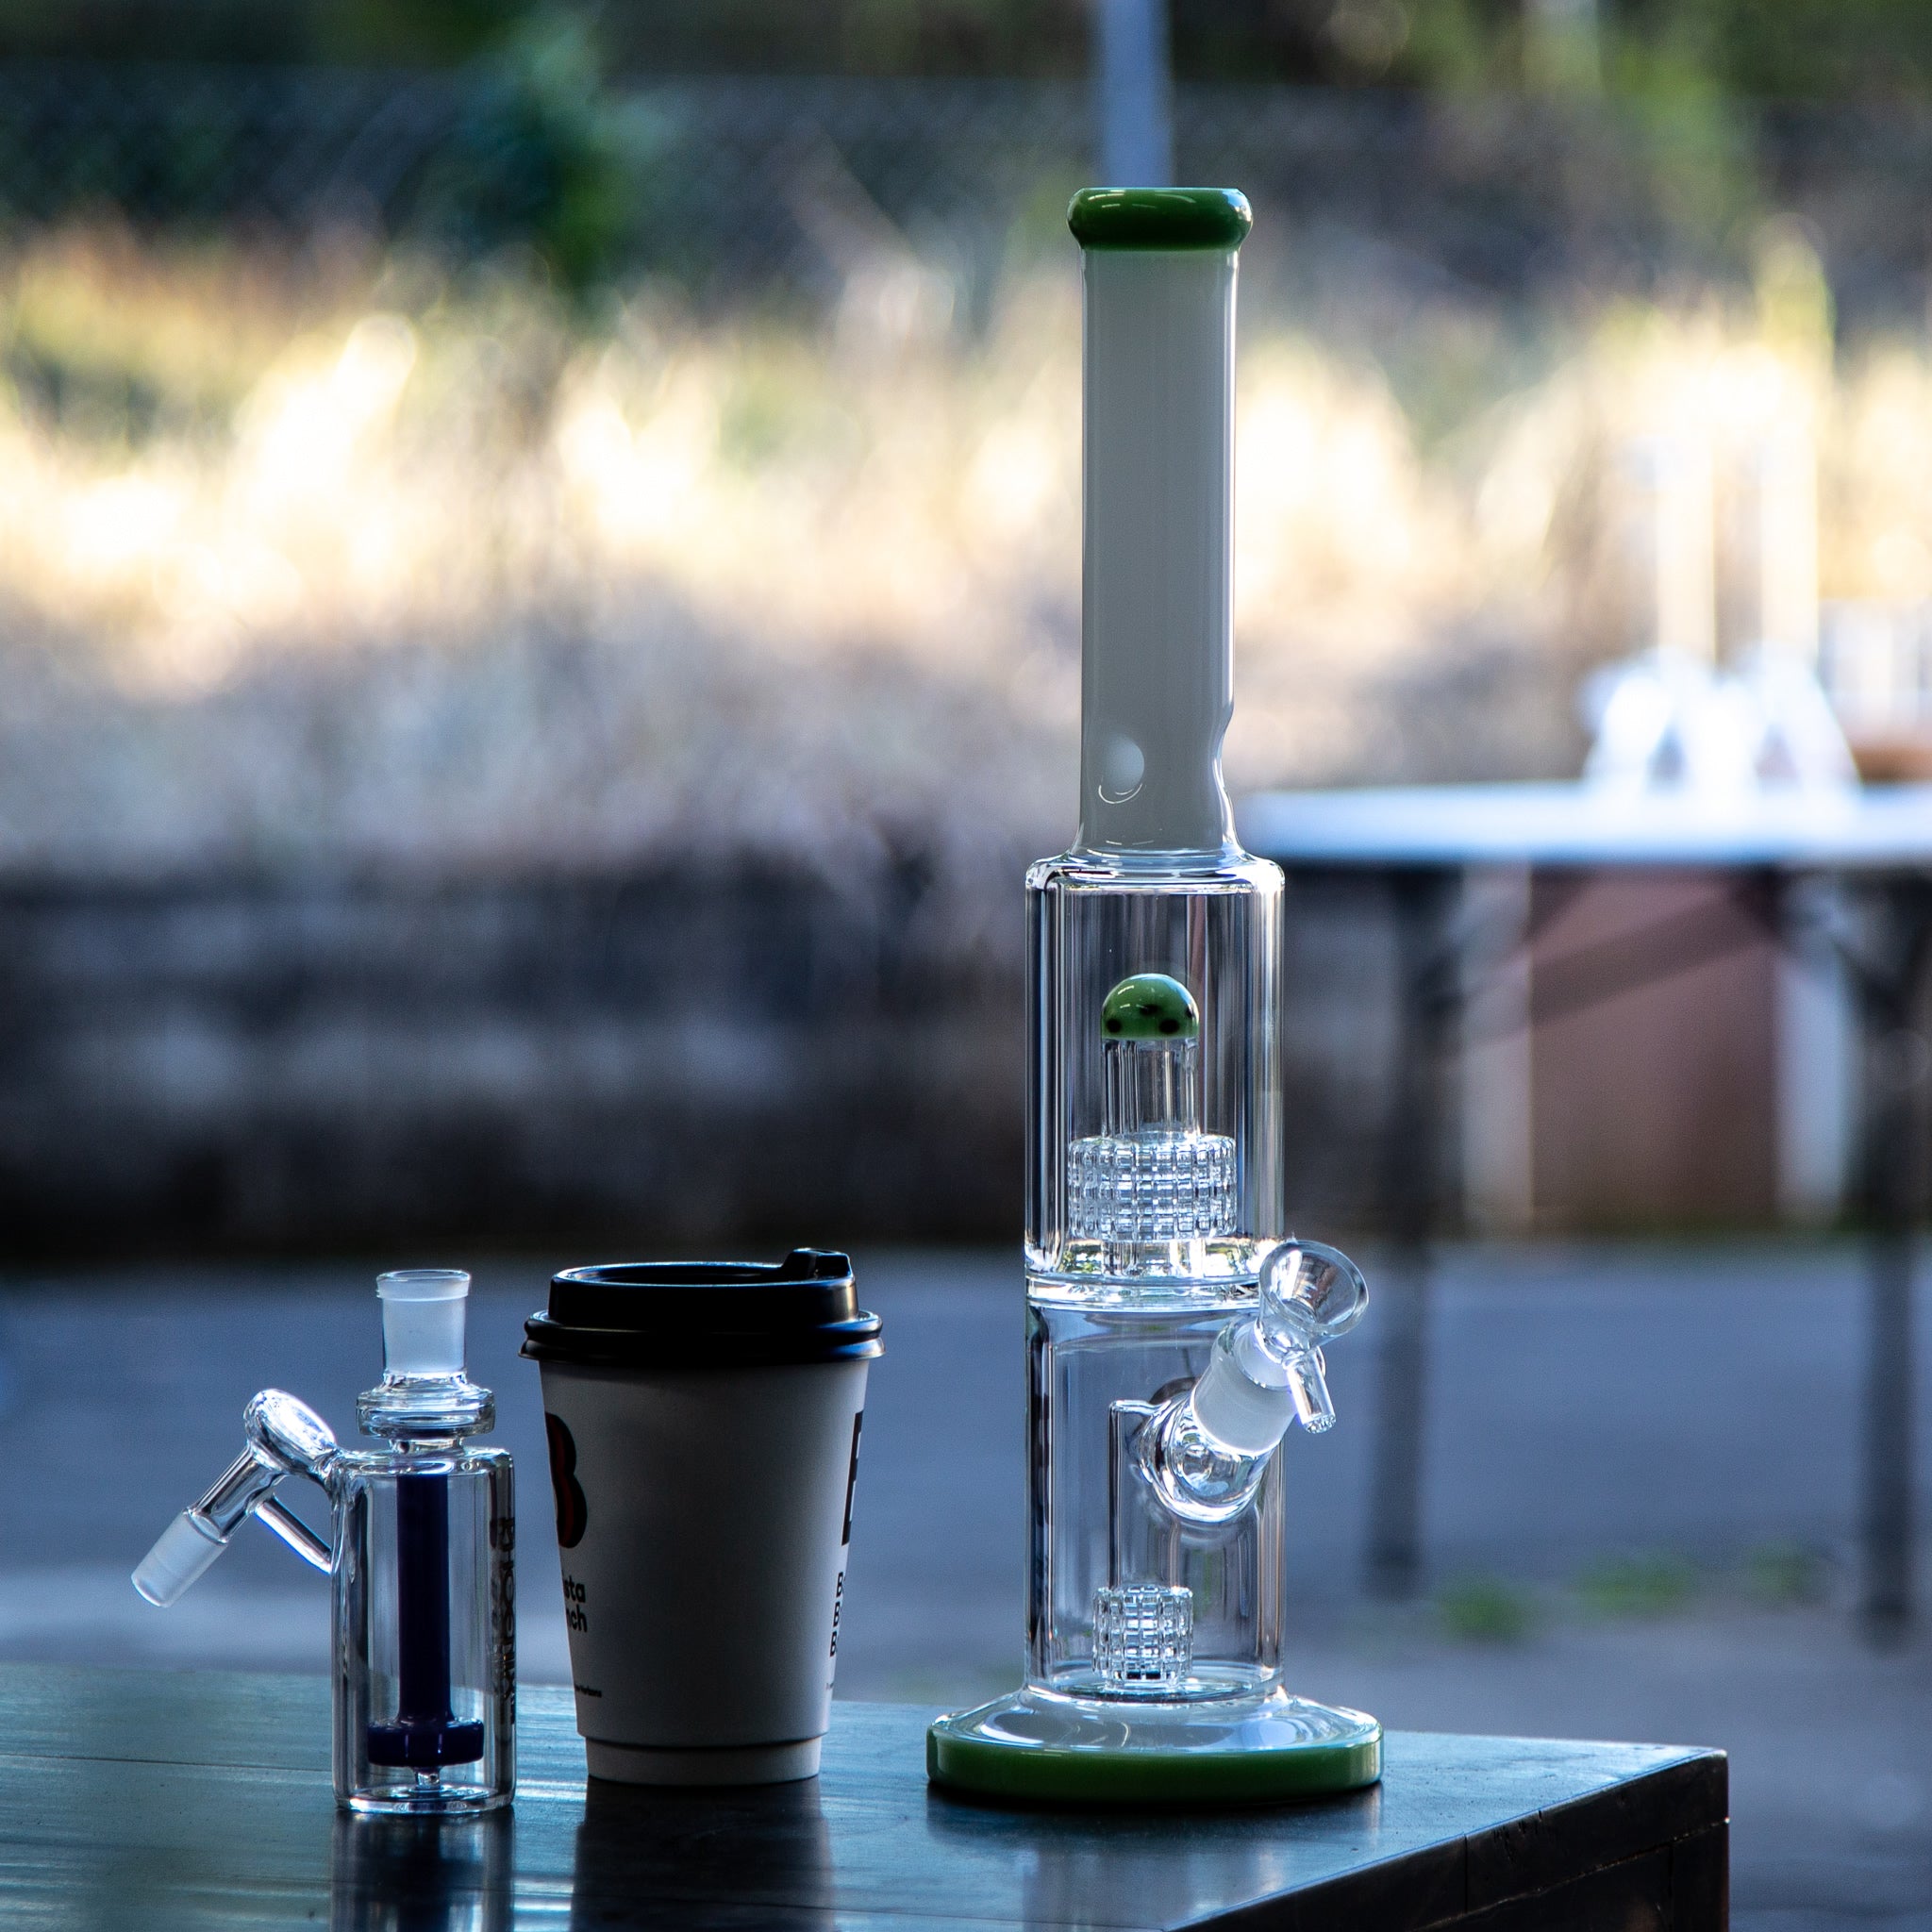 Glass bong available in Australia for use with medically prescribed cannabis.